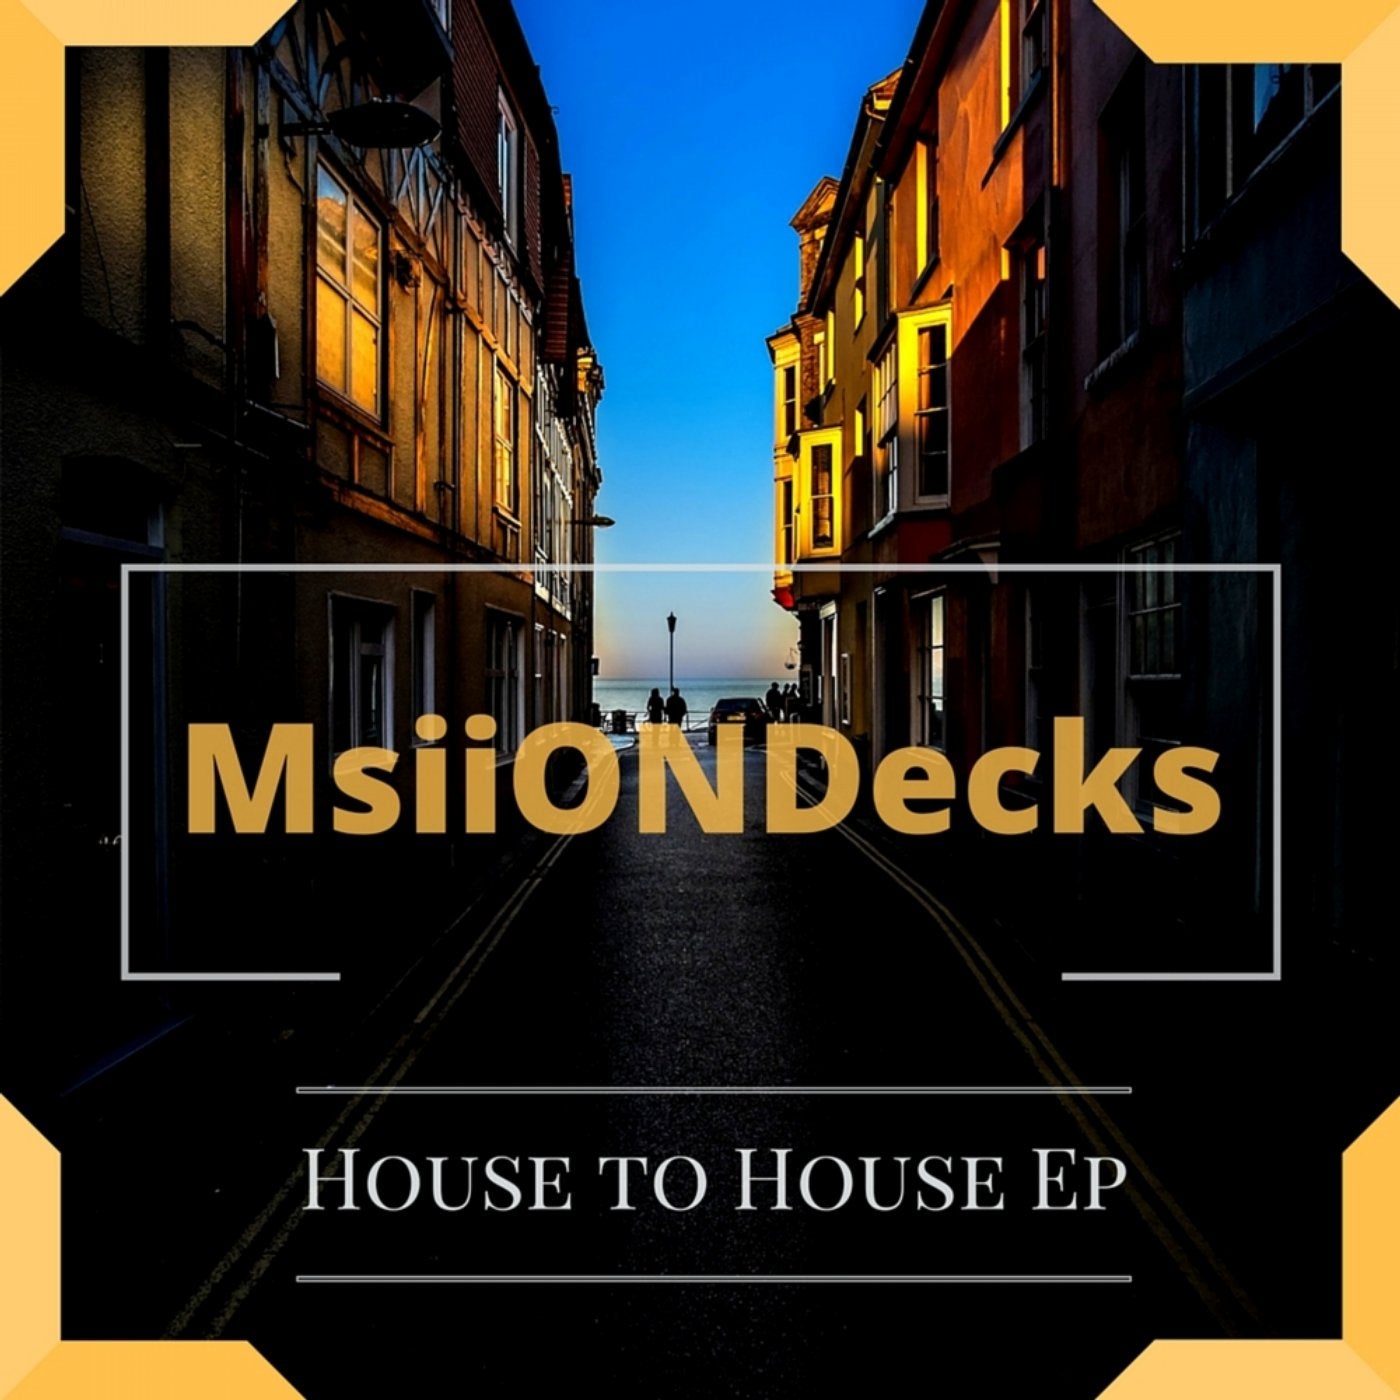 HOUSE TO HOUSE EP